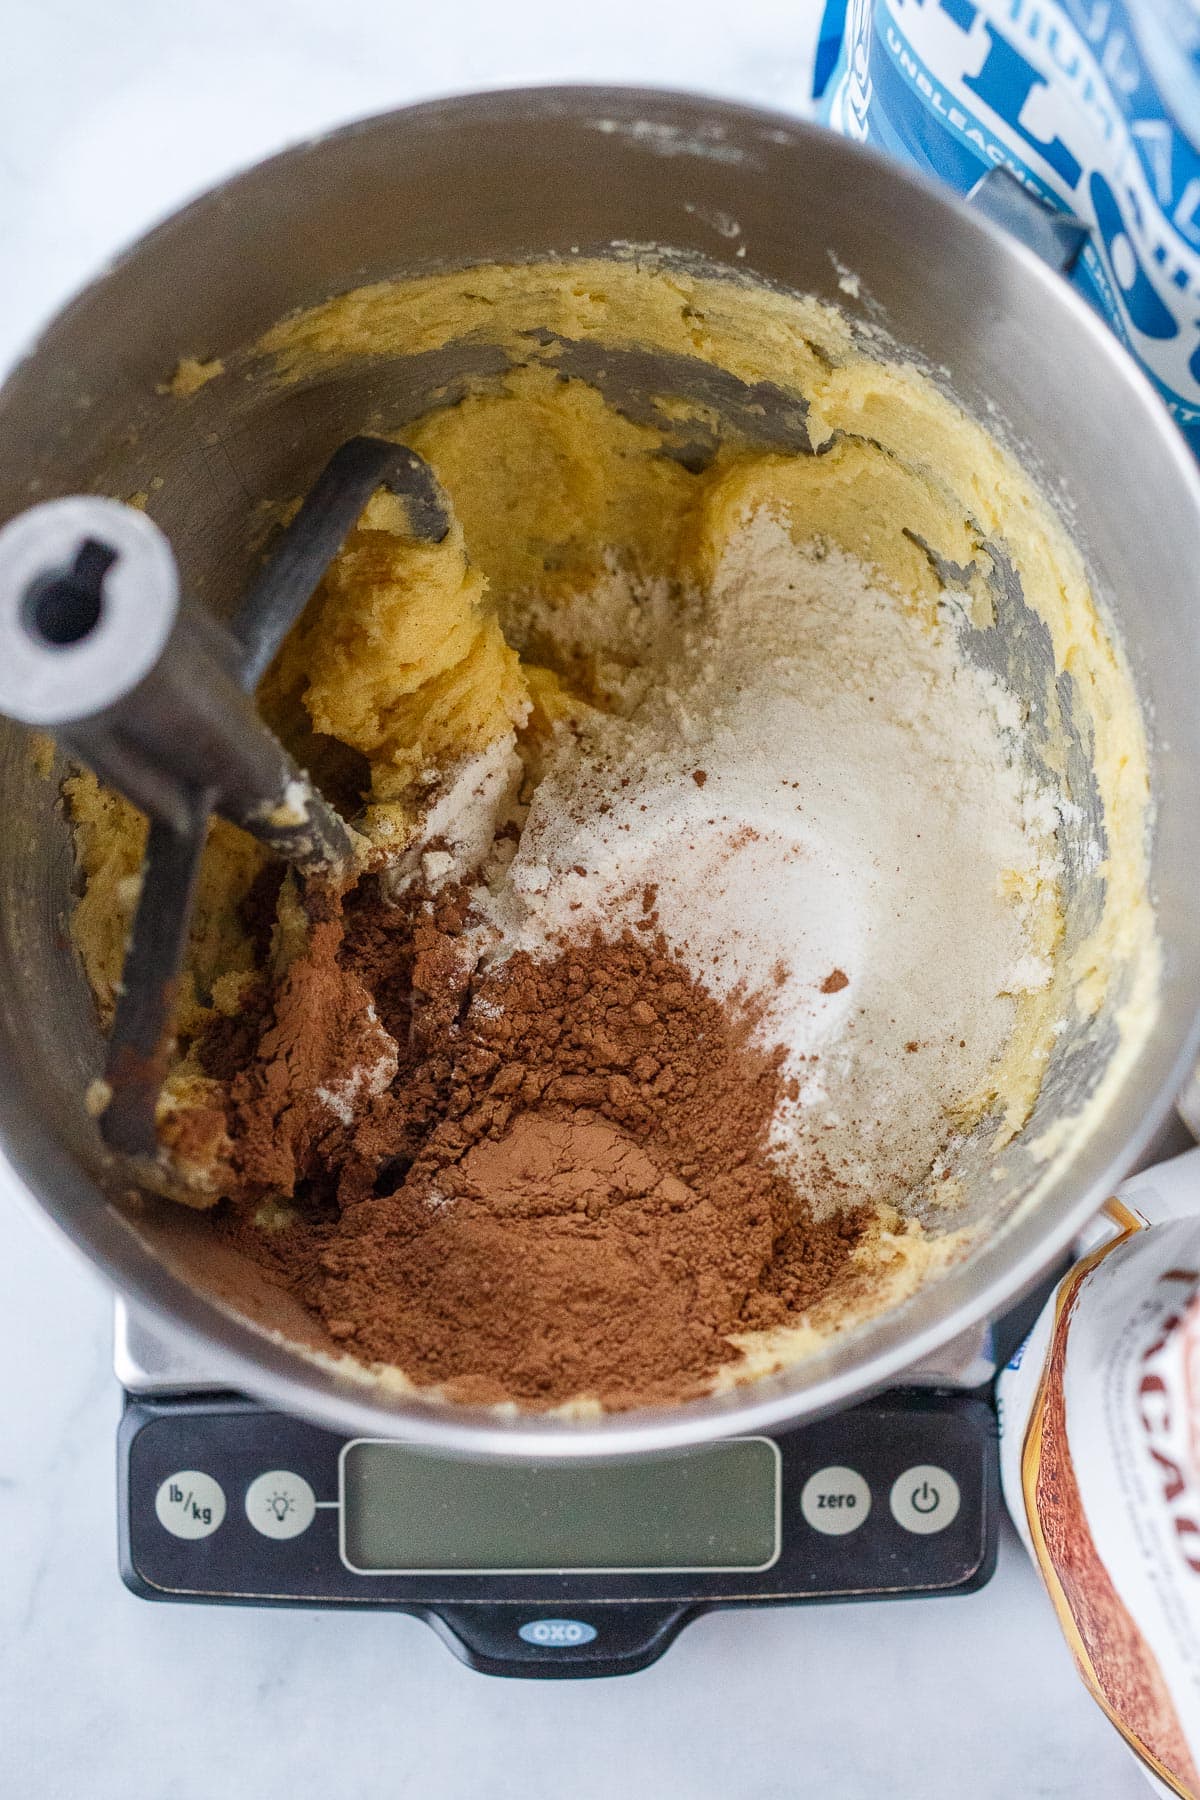 Flour and cacao powder added to whipped butter and sugar.